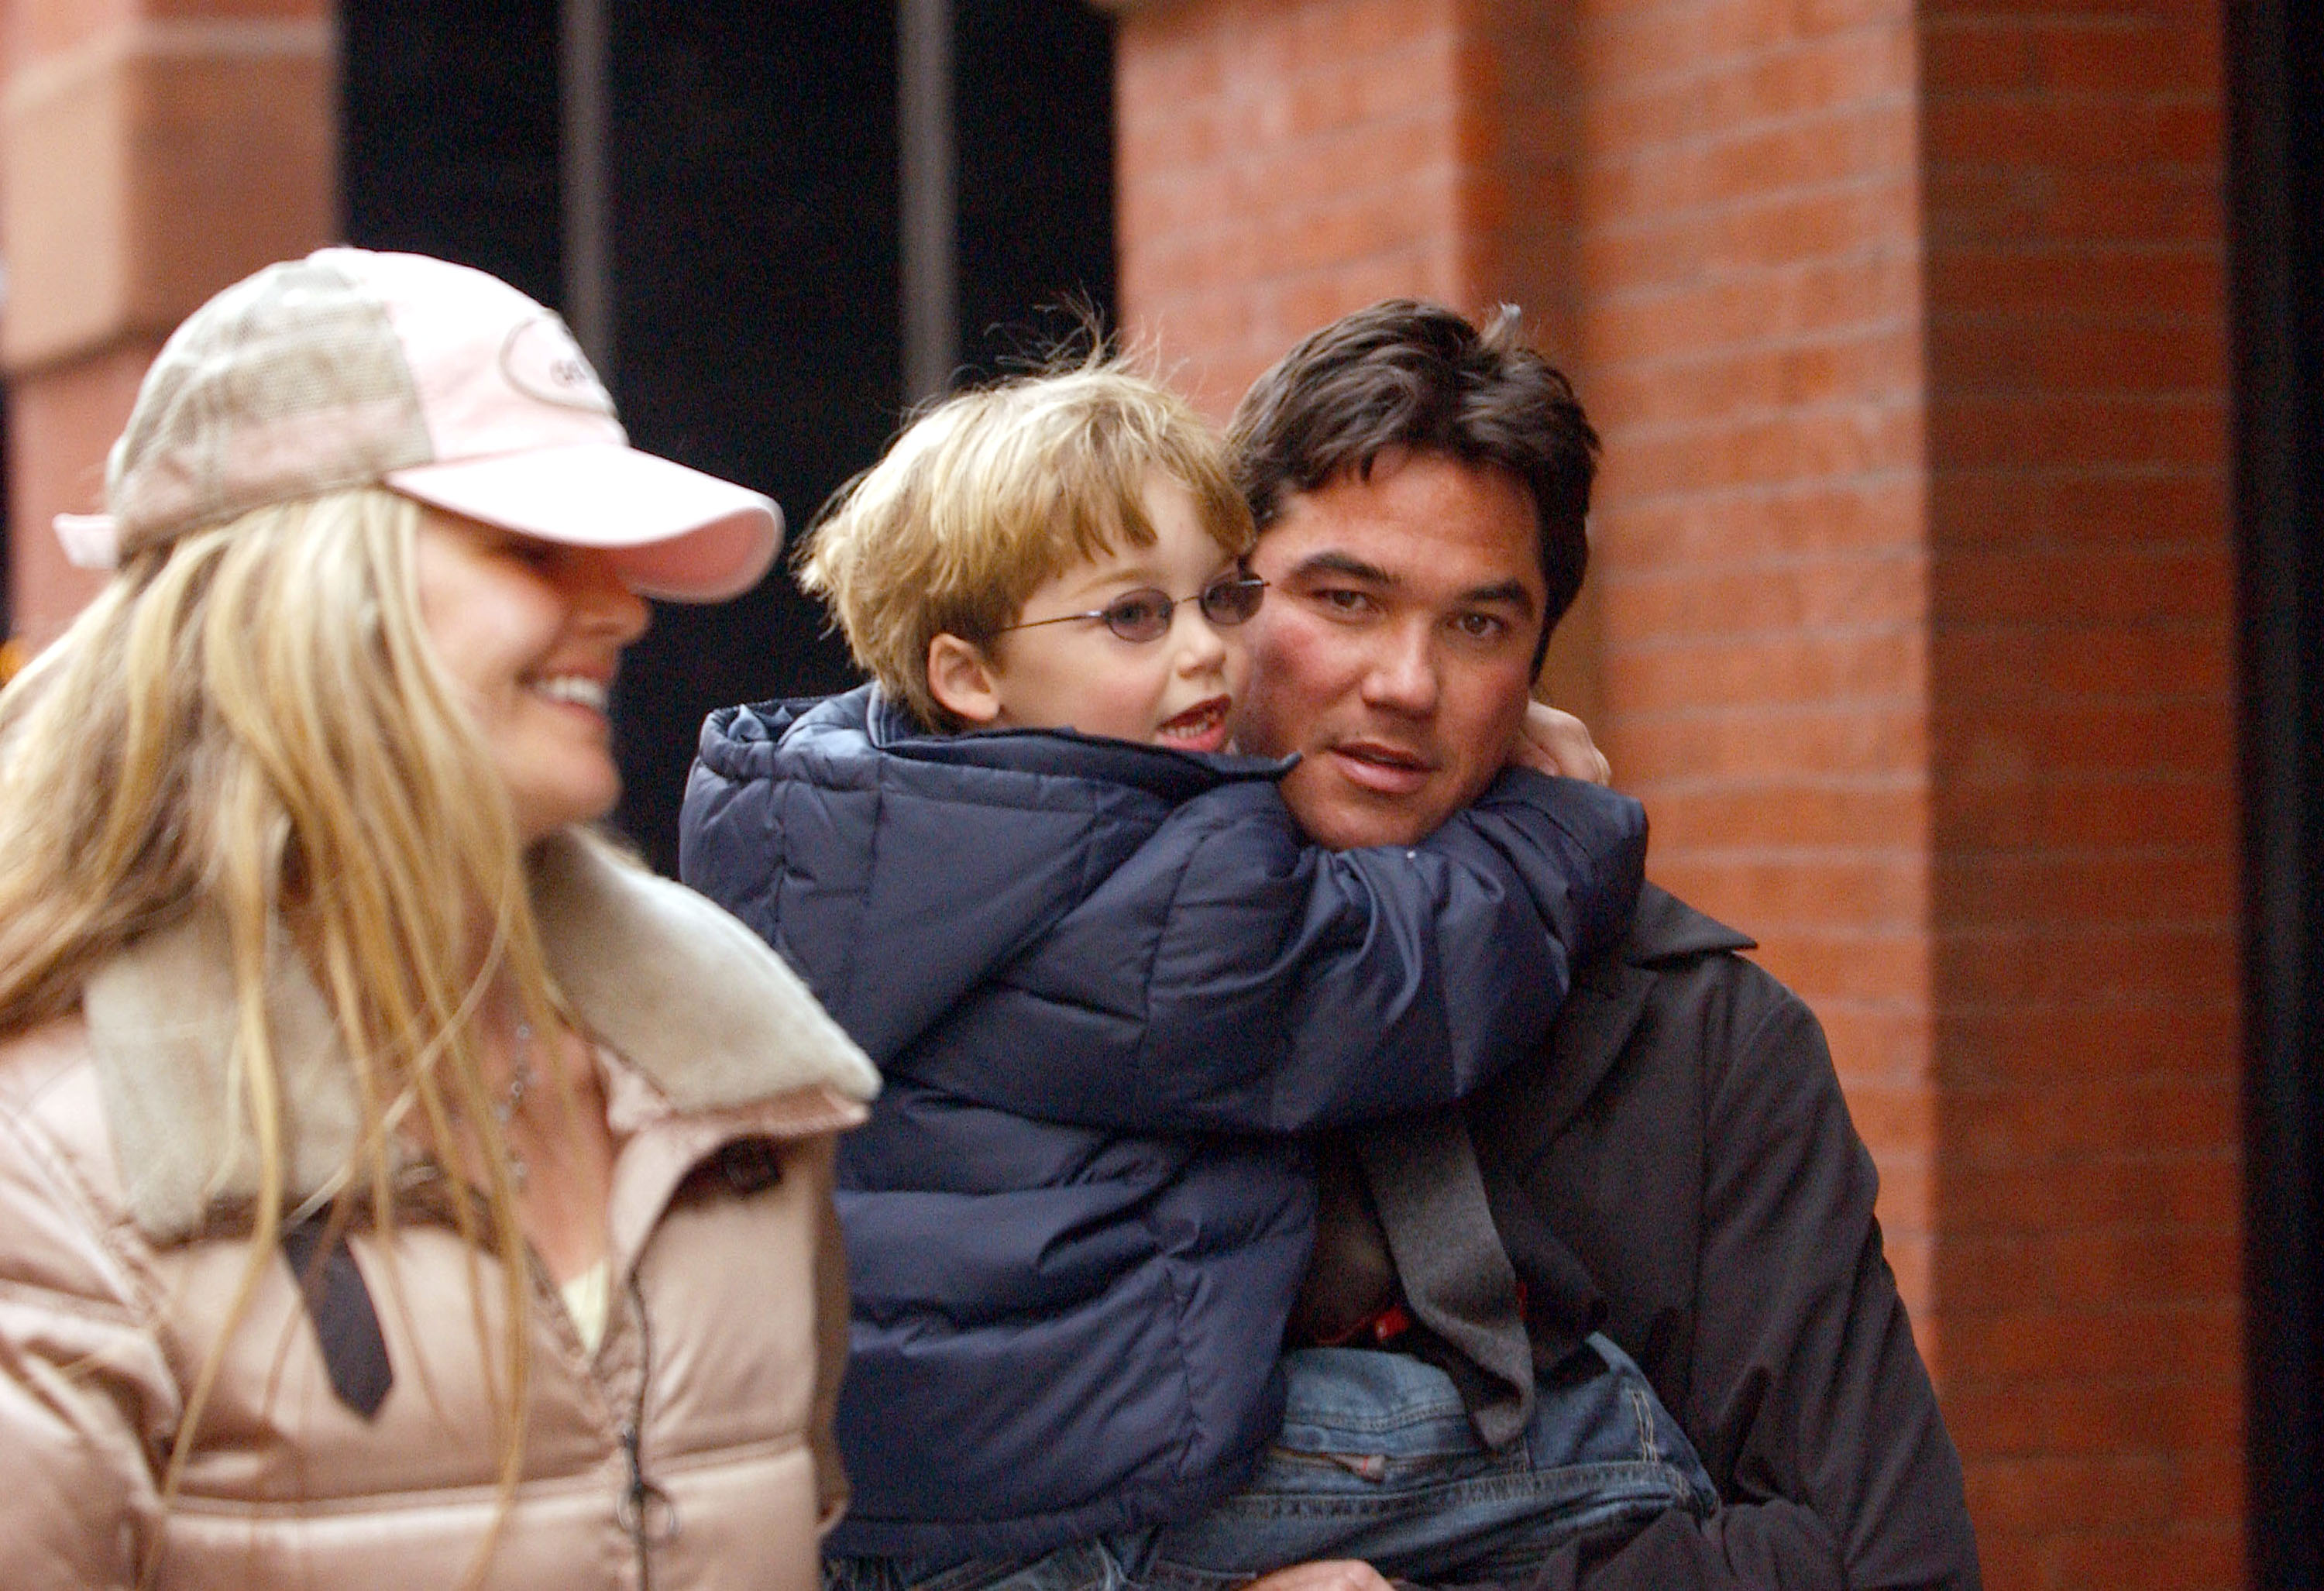 Samantha Torres with Christopher and Dean Cain spotted in New York City on March 17, 2005 | Source: Getty Images